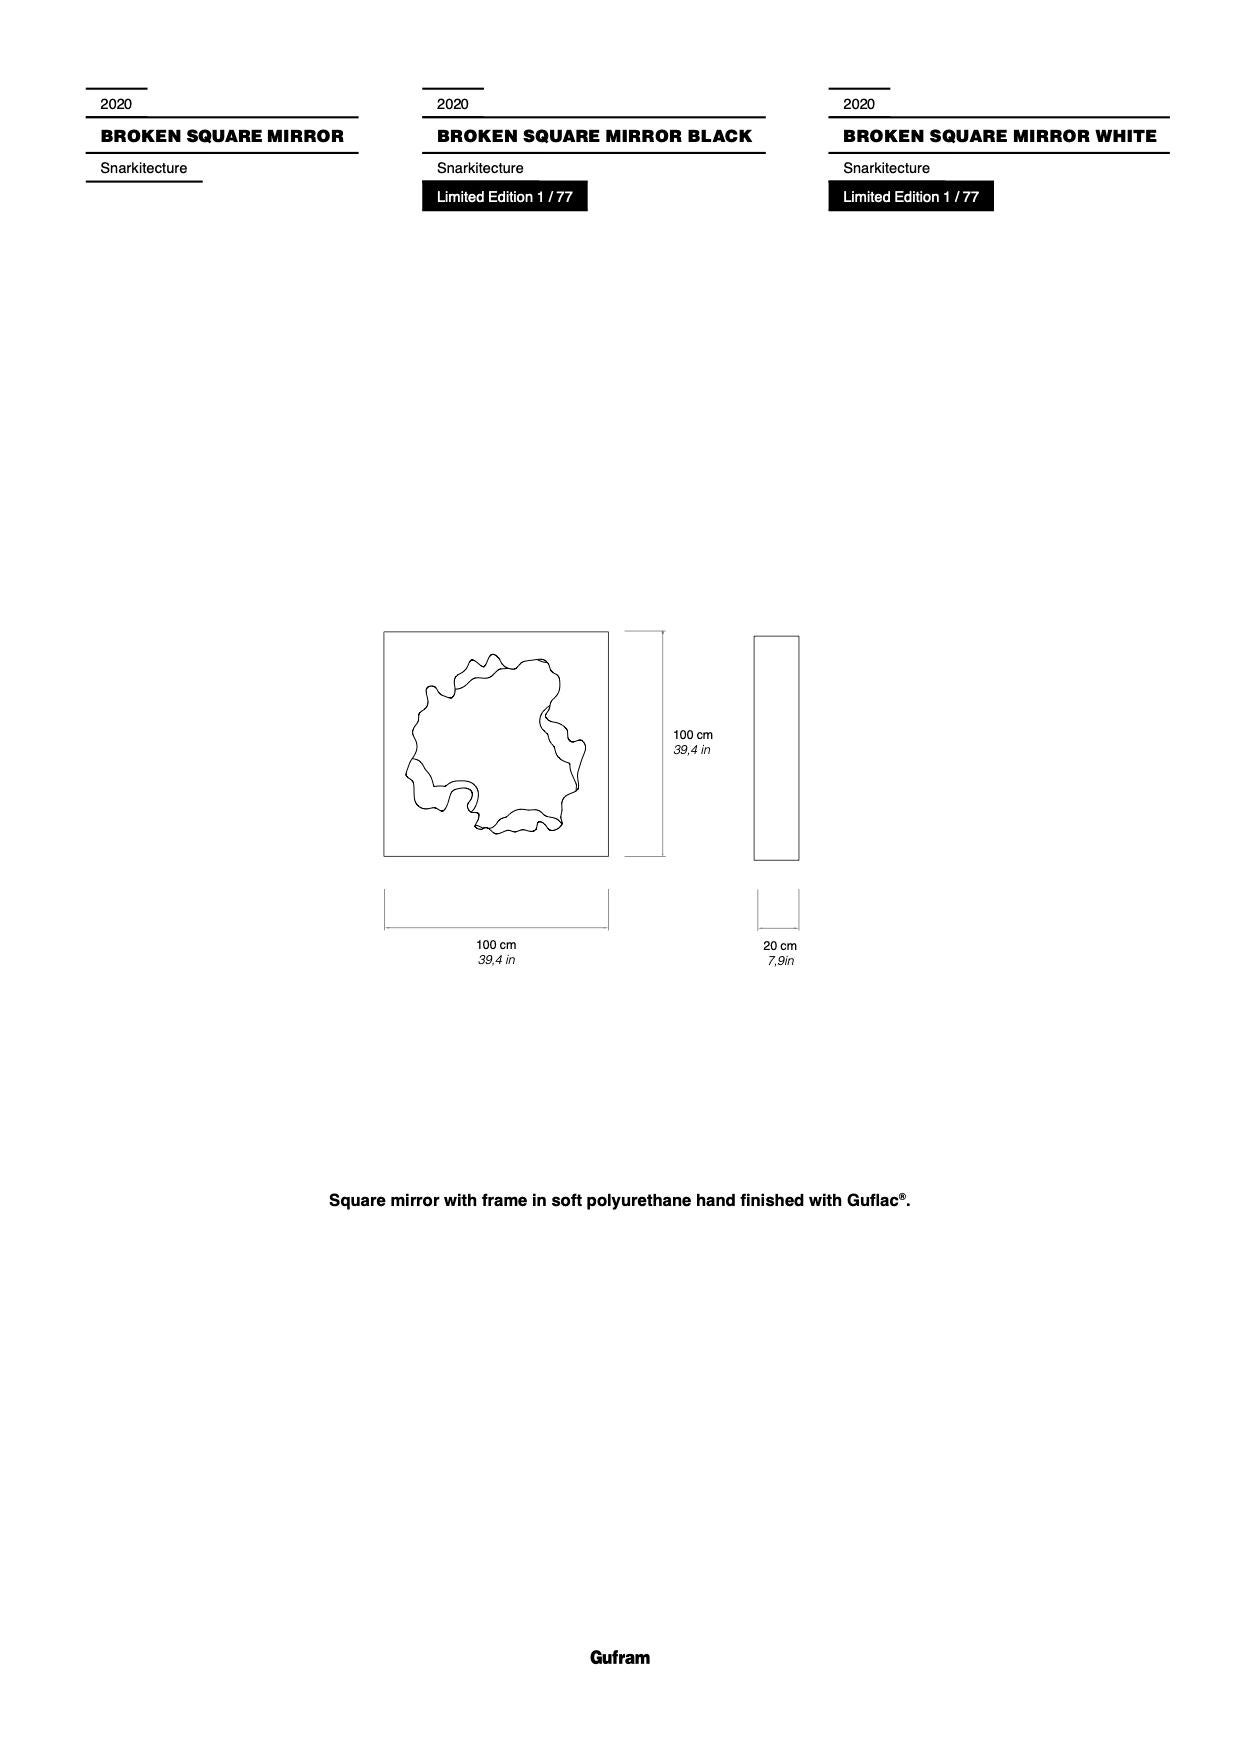 Italian Gufram Broken Square Mirror White by Snarkitecture, Limited Edition of 77